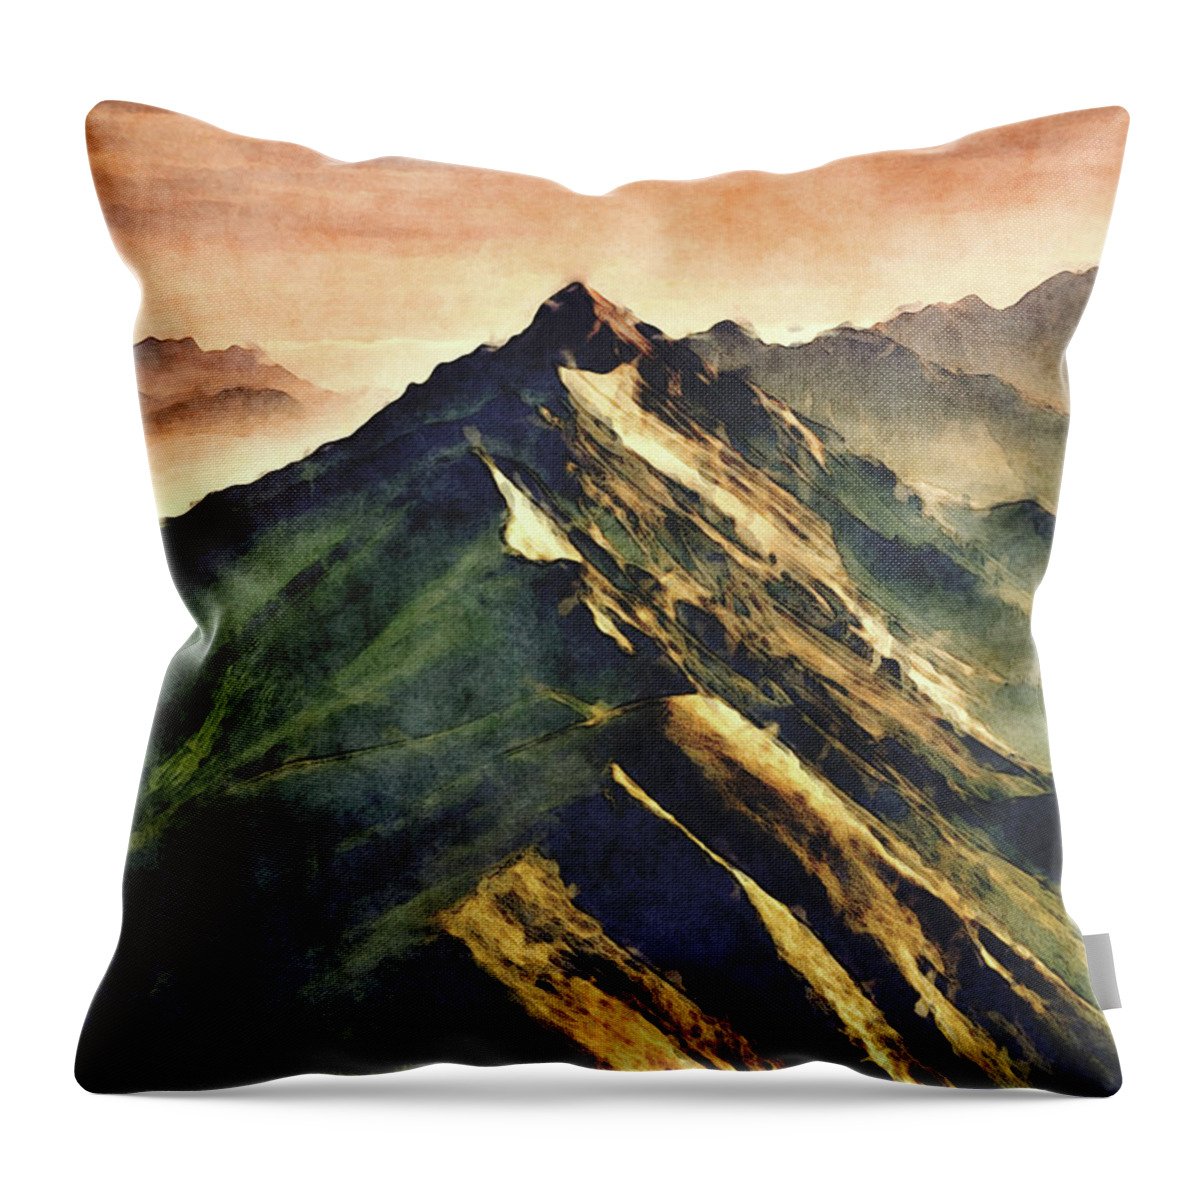 Mountains Throw Pillow featuring the digital art Mountains In The Clouds by Phil Perkins